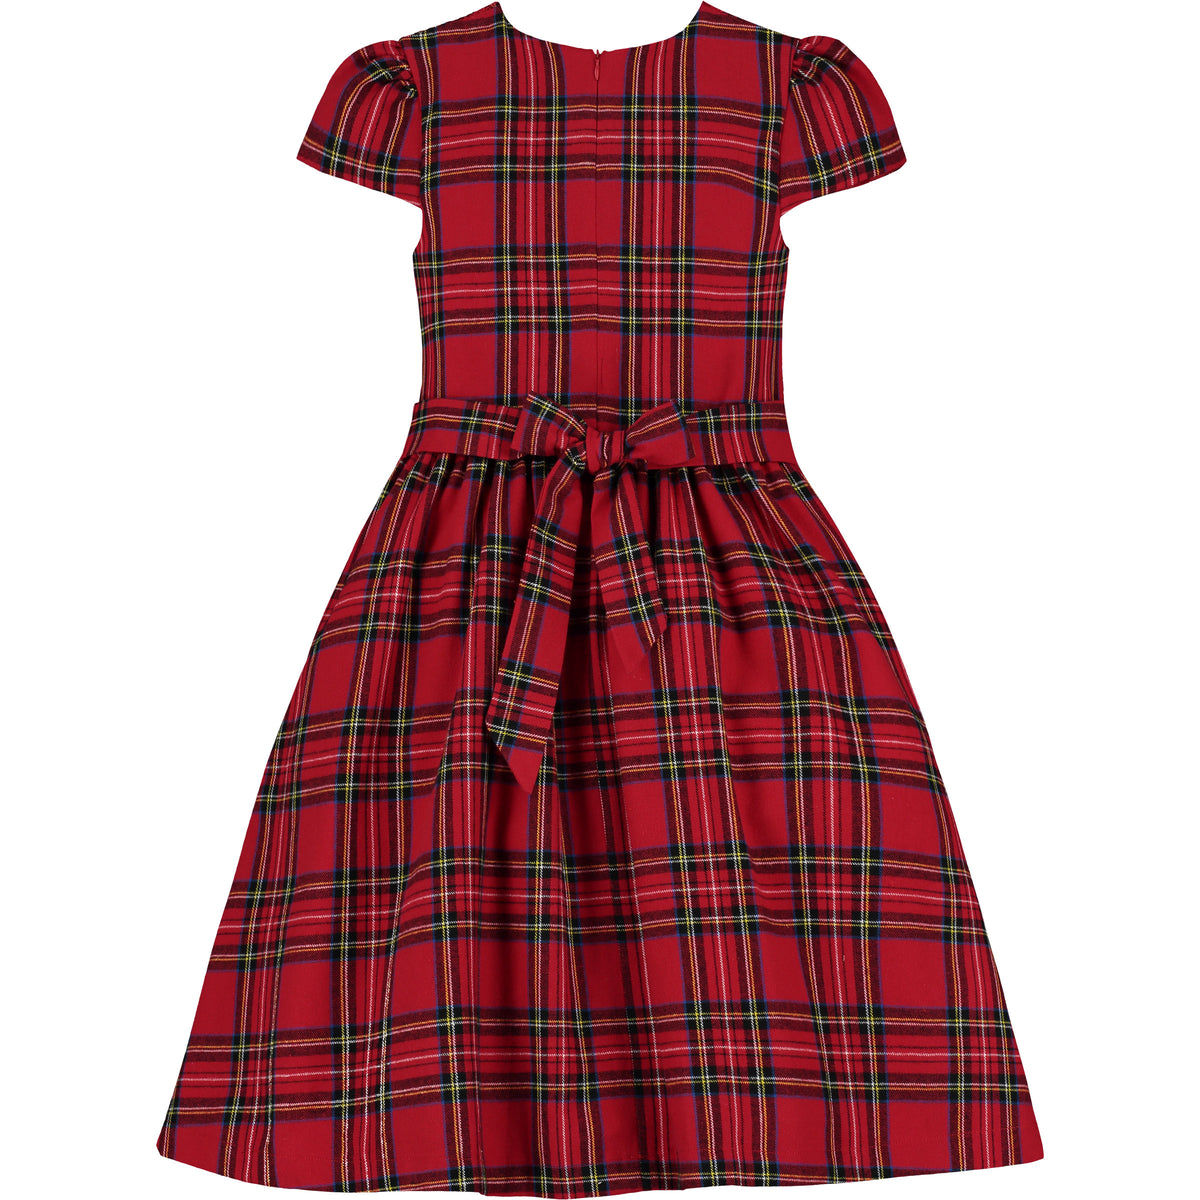 Bonnie Plaid Cotton Smocked Girls Party Dress Red | Holly Hastie London